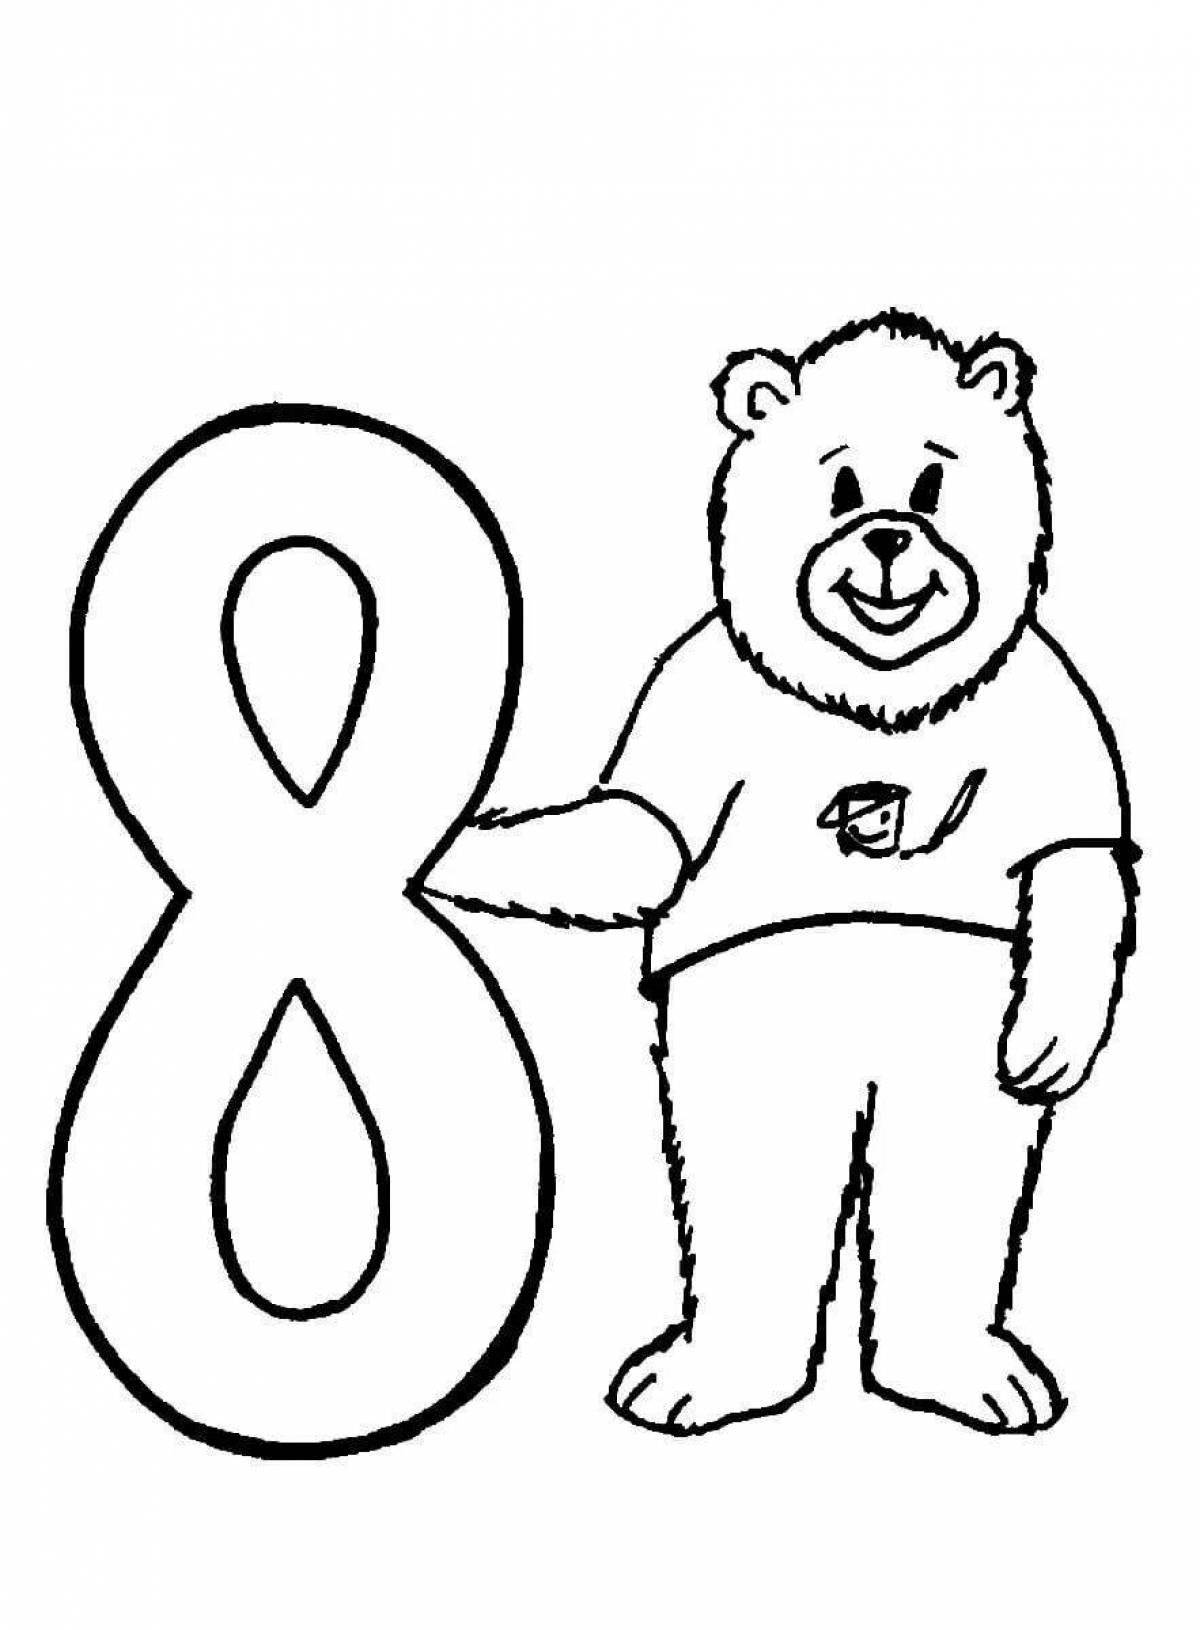 Attractive coloring page number 8